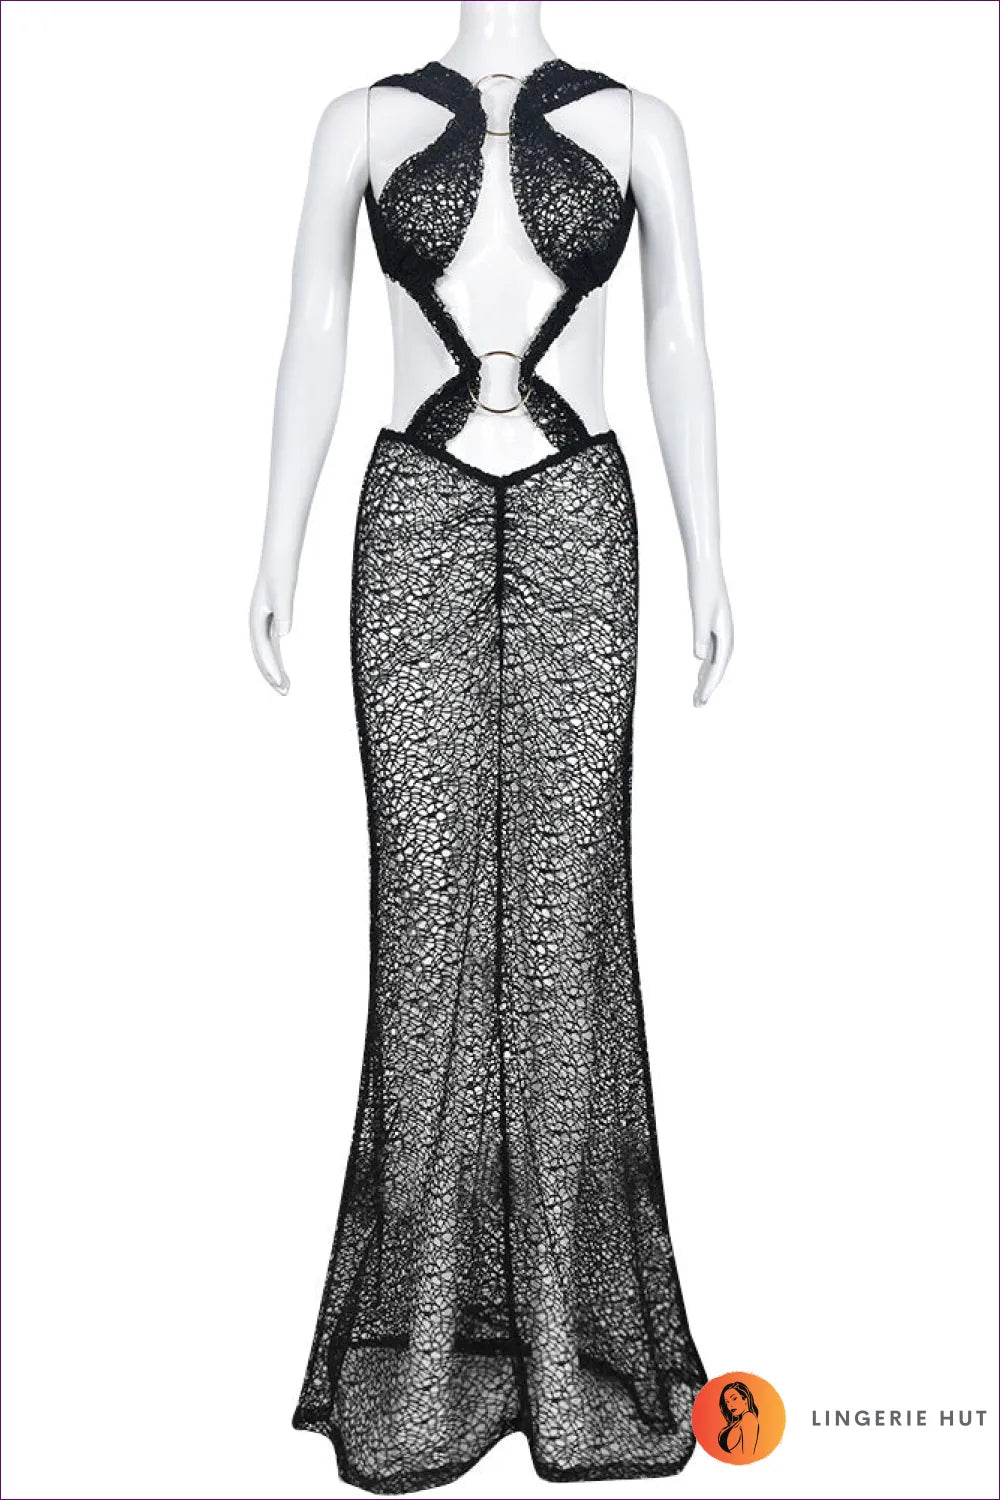 Turn Heads With Lingerie Hut’s Sultry Backless Halter Neck Maxi Dress. See-through Lace, Steel Ring Accent,